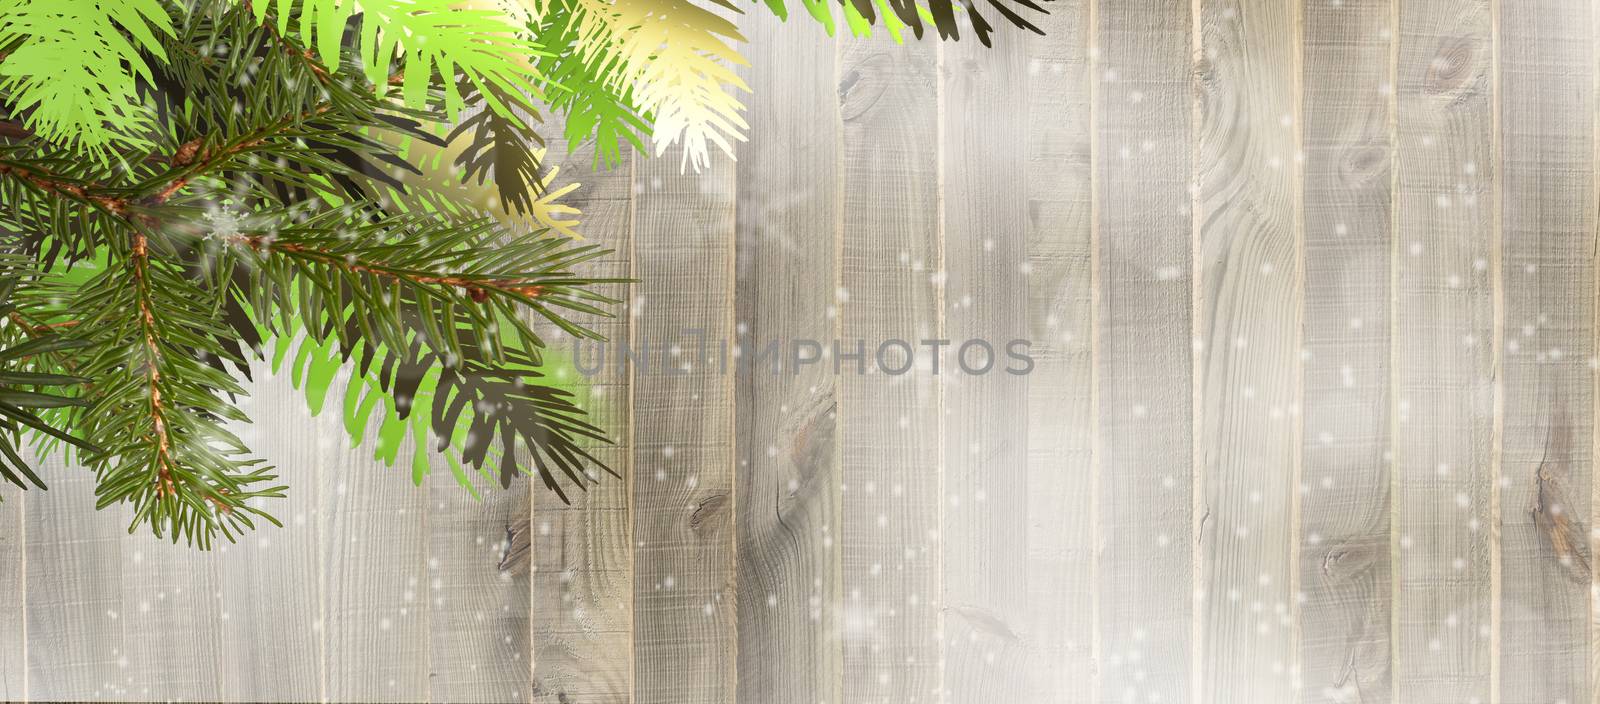 Christmas wooden background with fir. Christmas tree branches, snowflakes, snow on wooden background. Horizontal 3D illustration. Flat lay on wood. Copy space